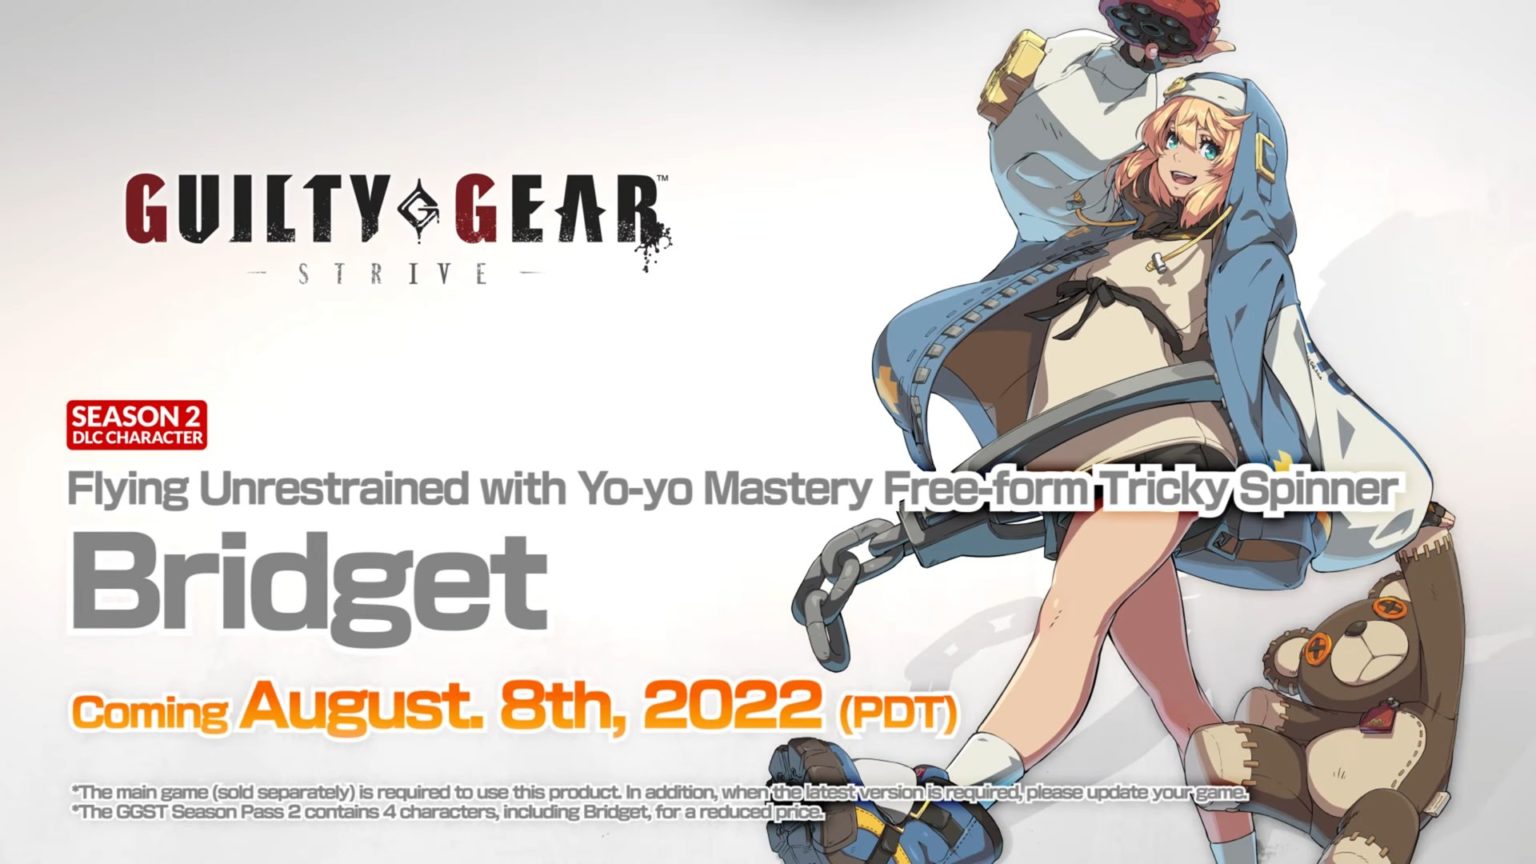 Bridget is the first character for Season 2 of Guilty Gear -Strive-